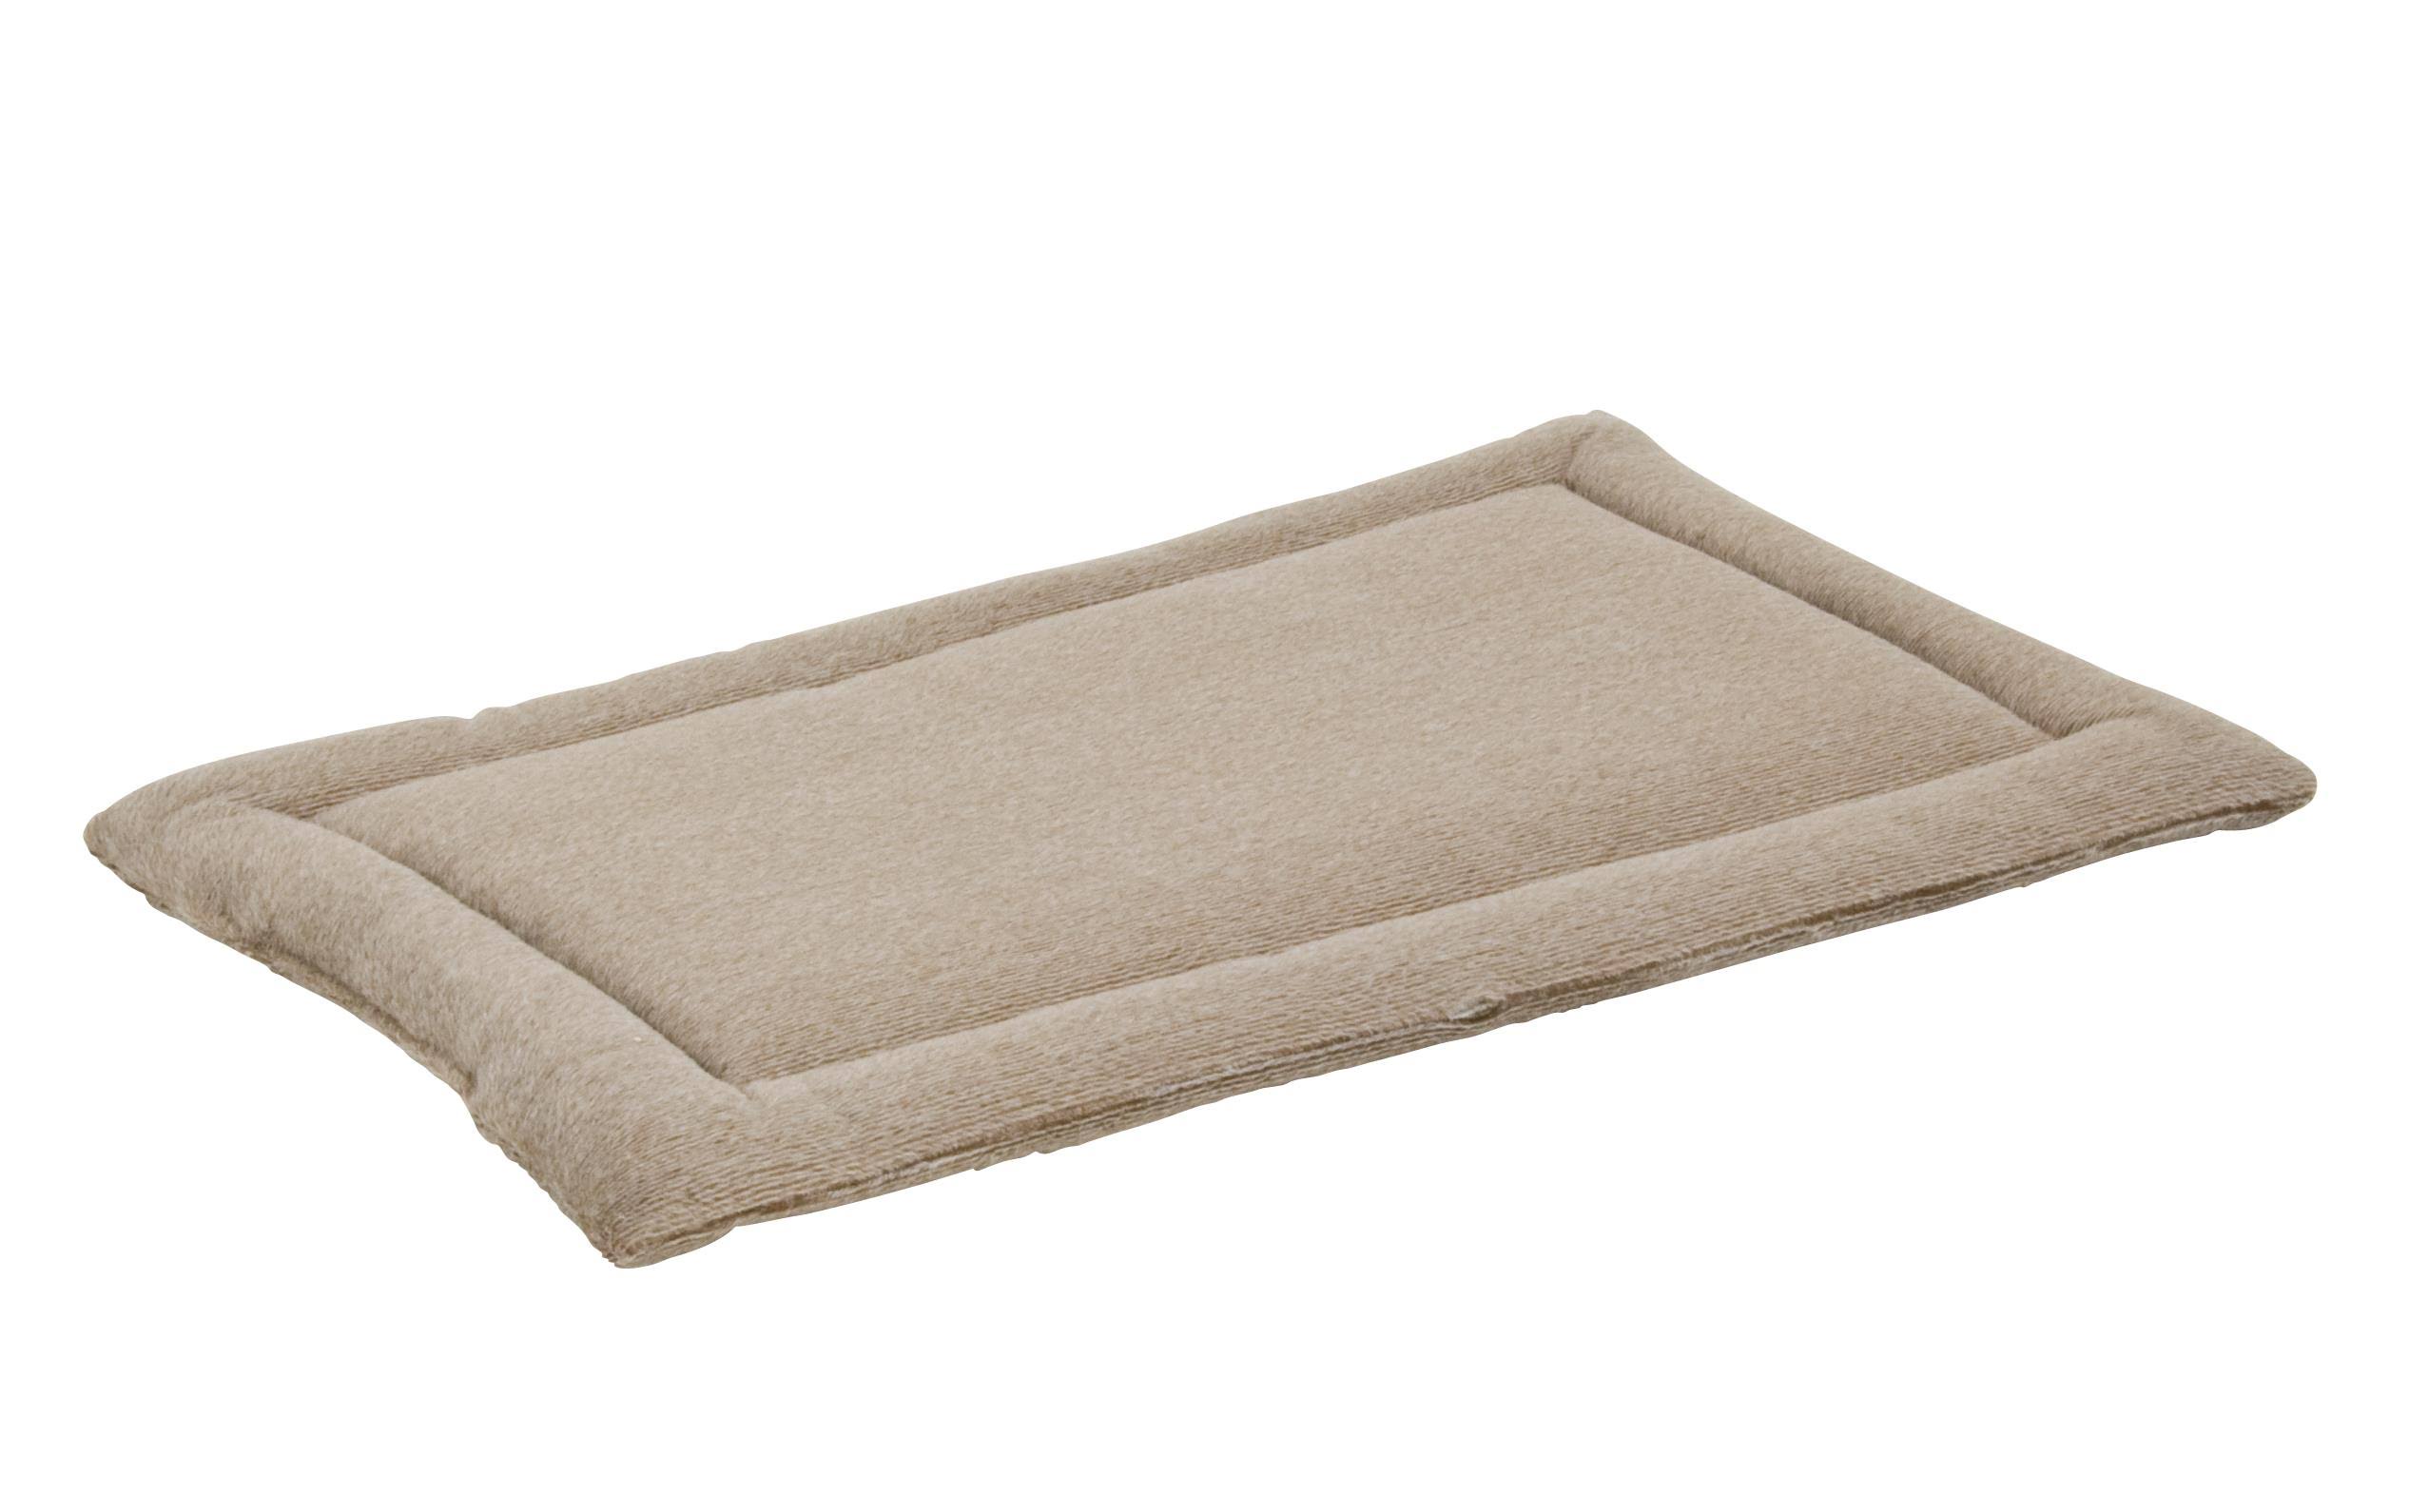 Petmate Kennel Mat - 28.5in x 18.5in